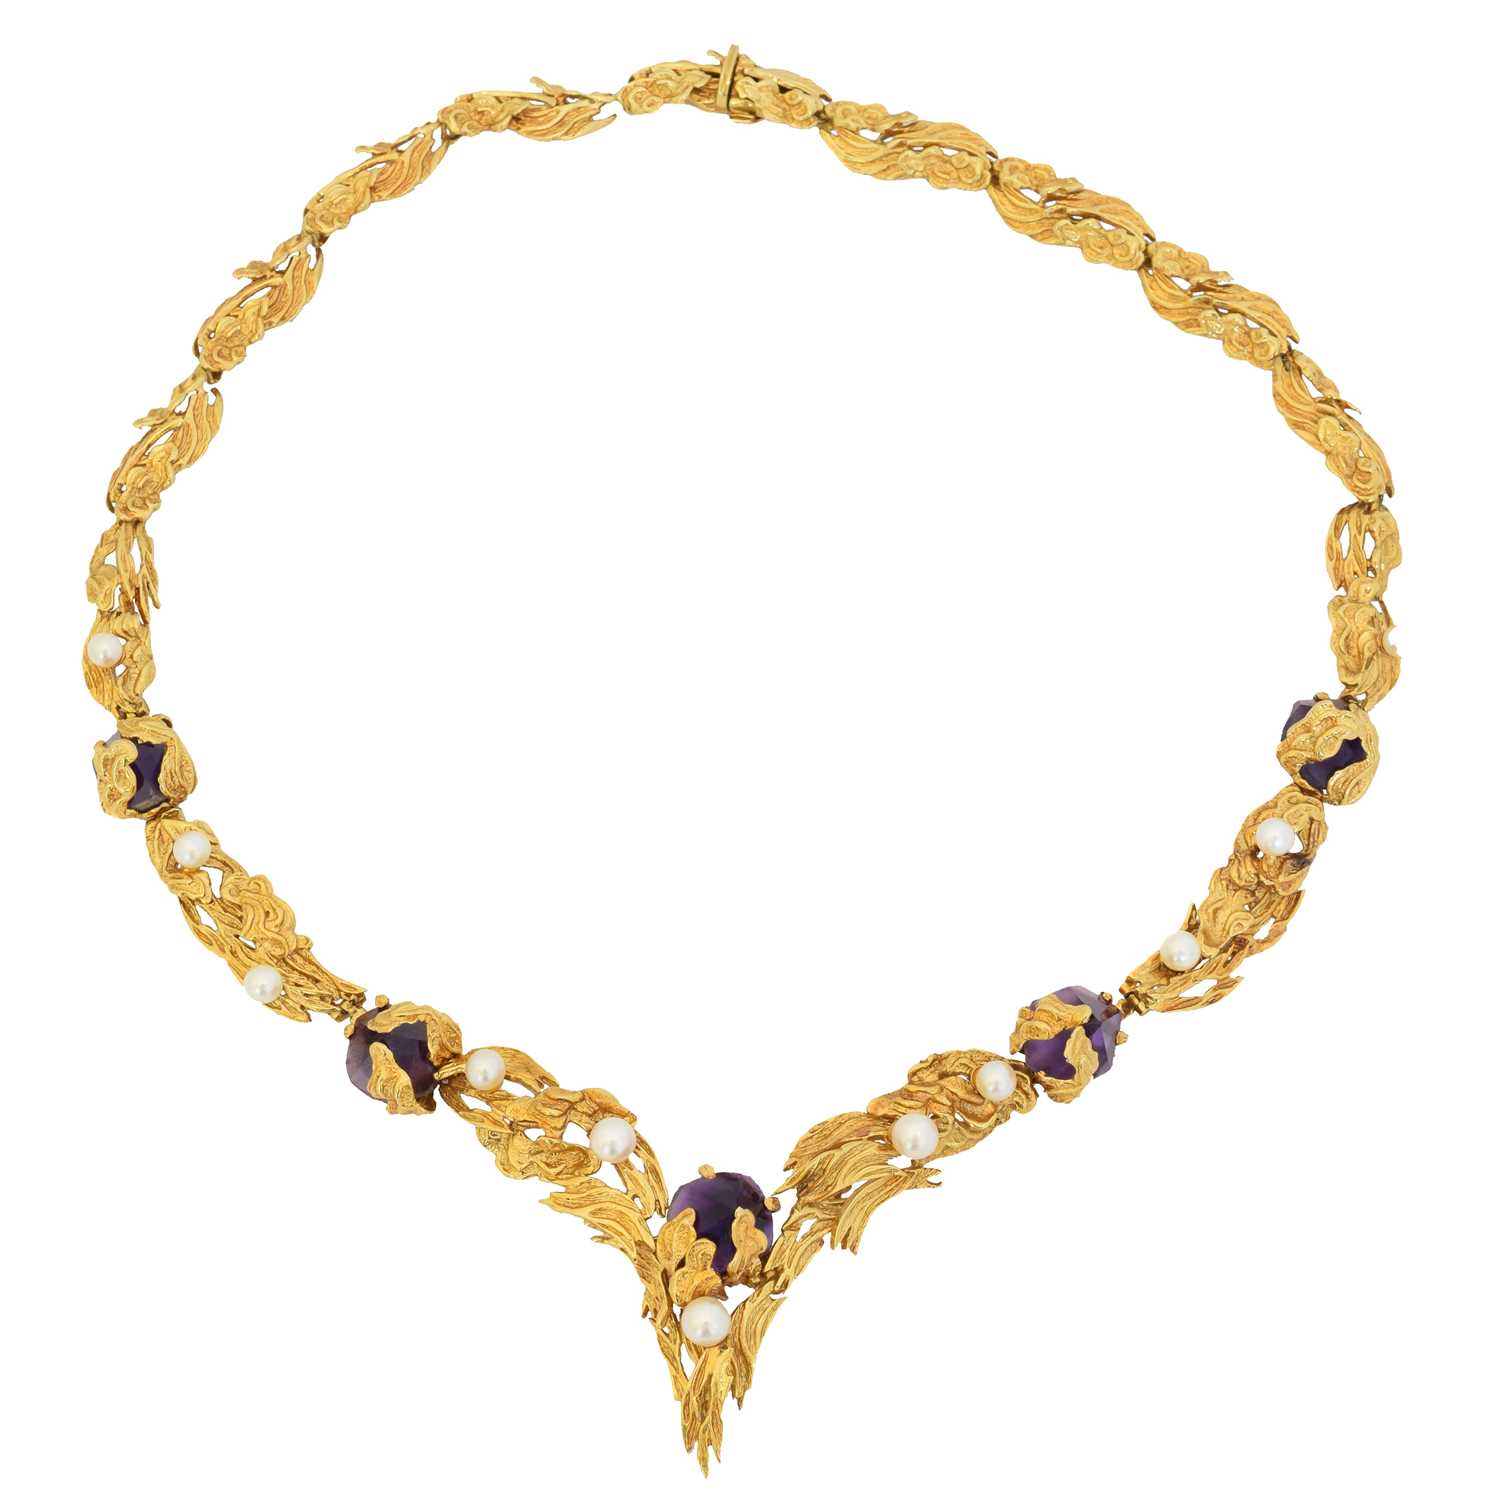 Lot 69 - A 1960s 18ct gold amethyst and cultured pearl necklace by Grossé